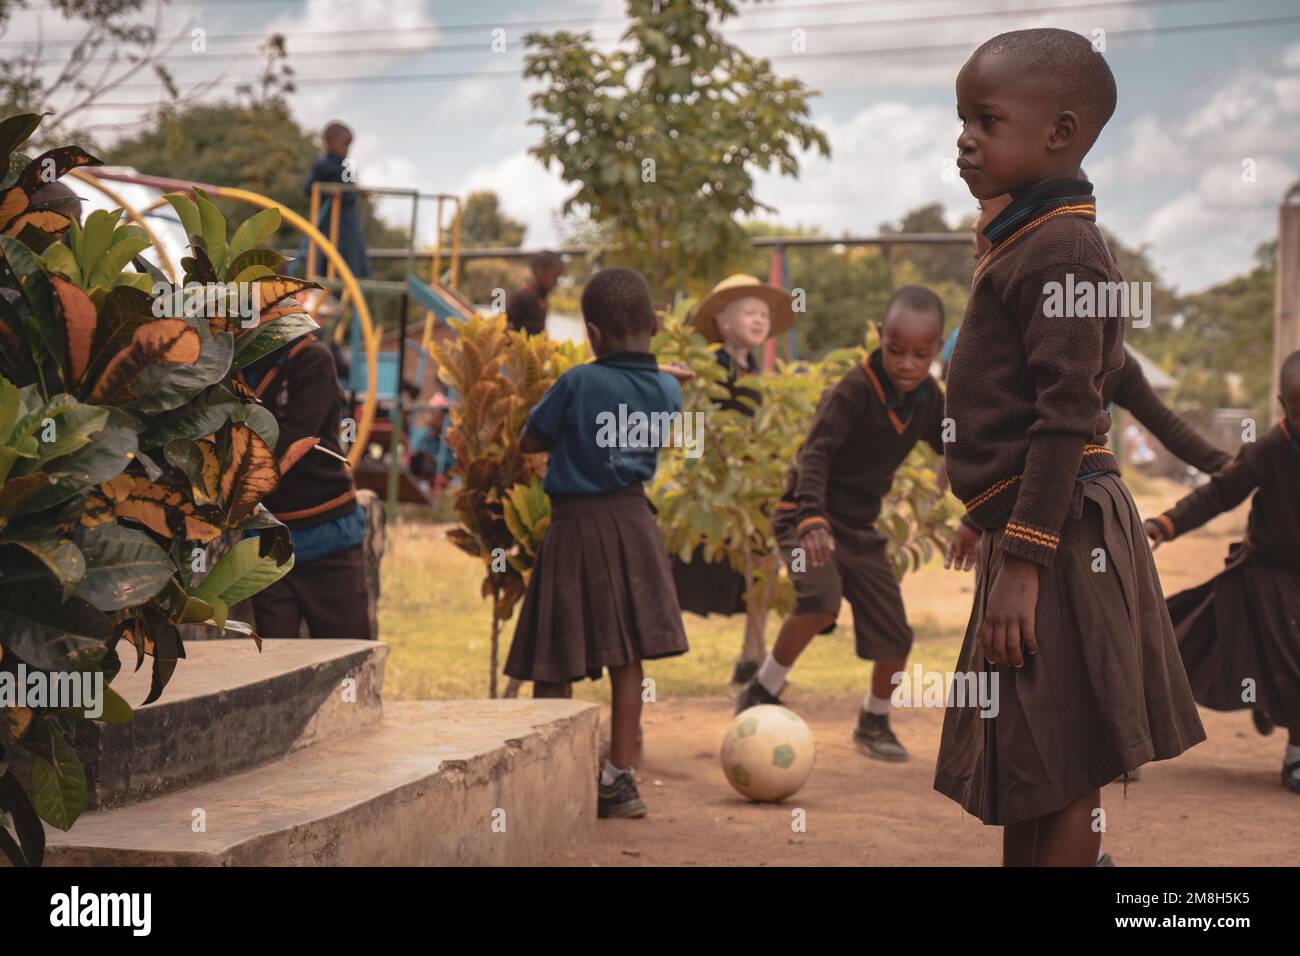 25th of March 2022 - Mwanza, Tanzania - Children playing in their school grounds and having fun. Running, skipping rope, playing football. Stock Photo